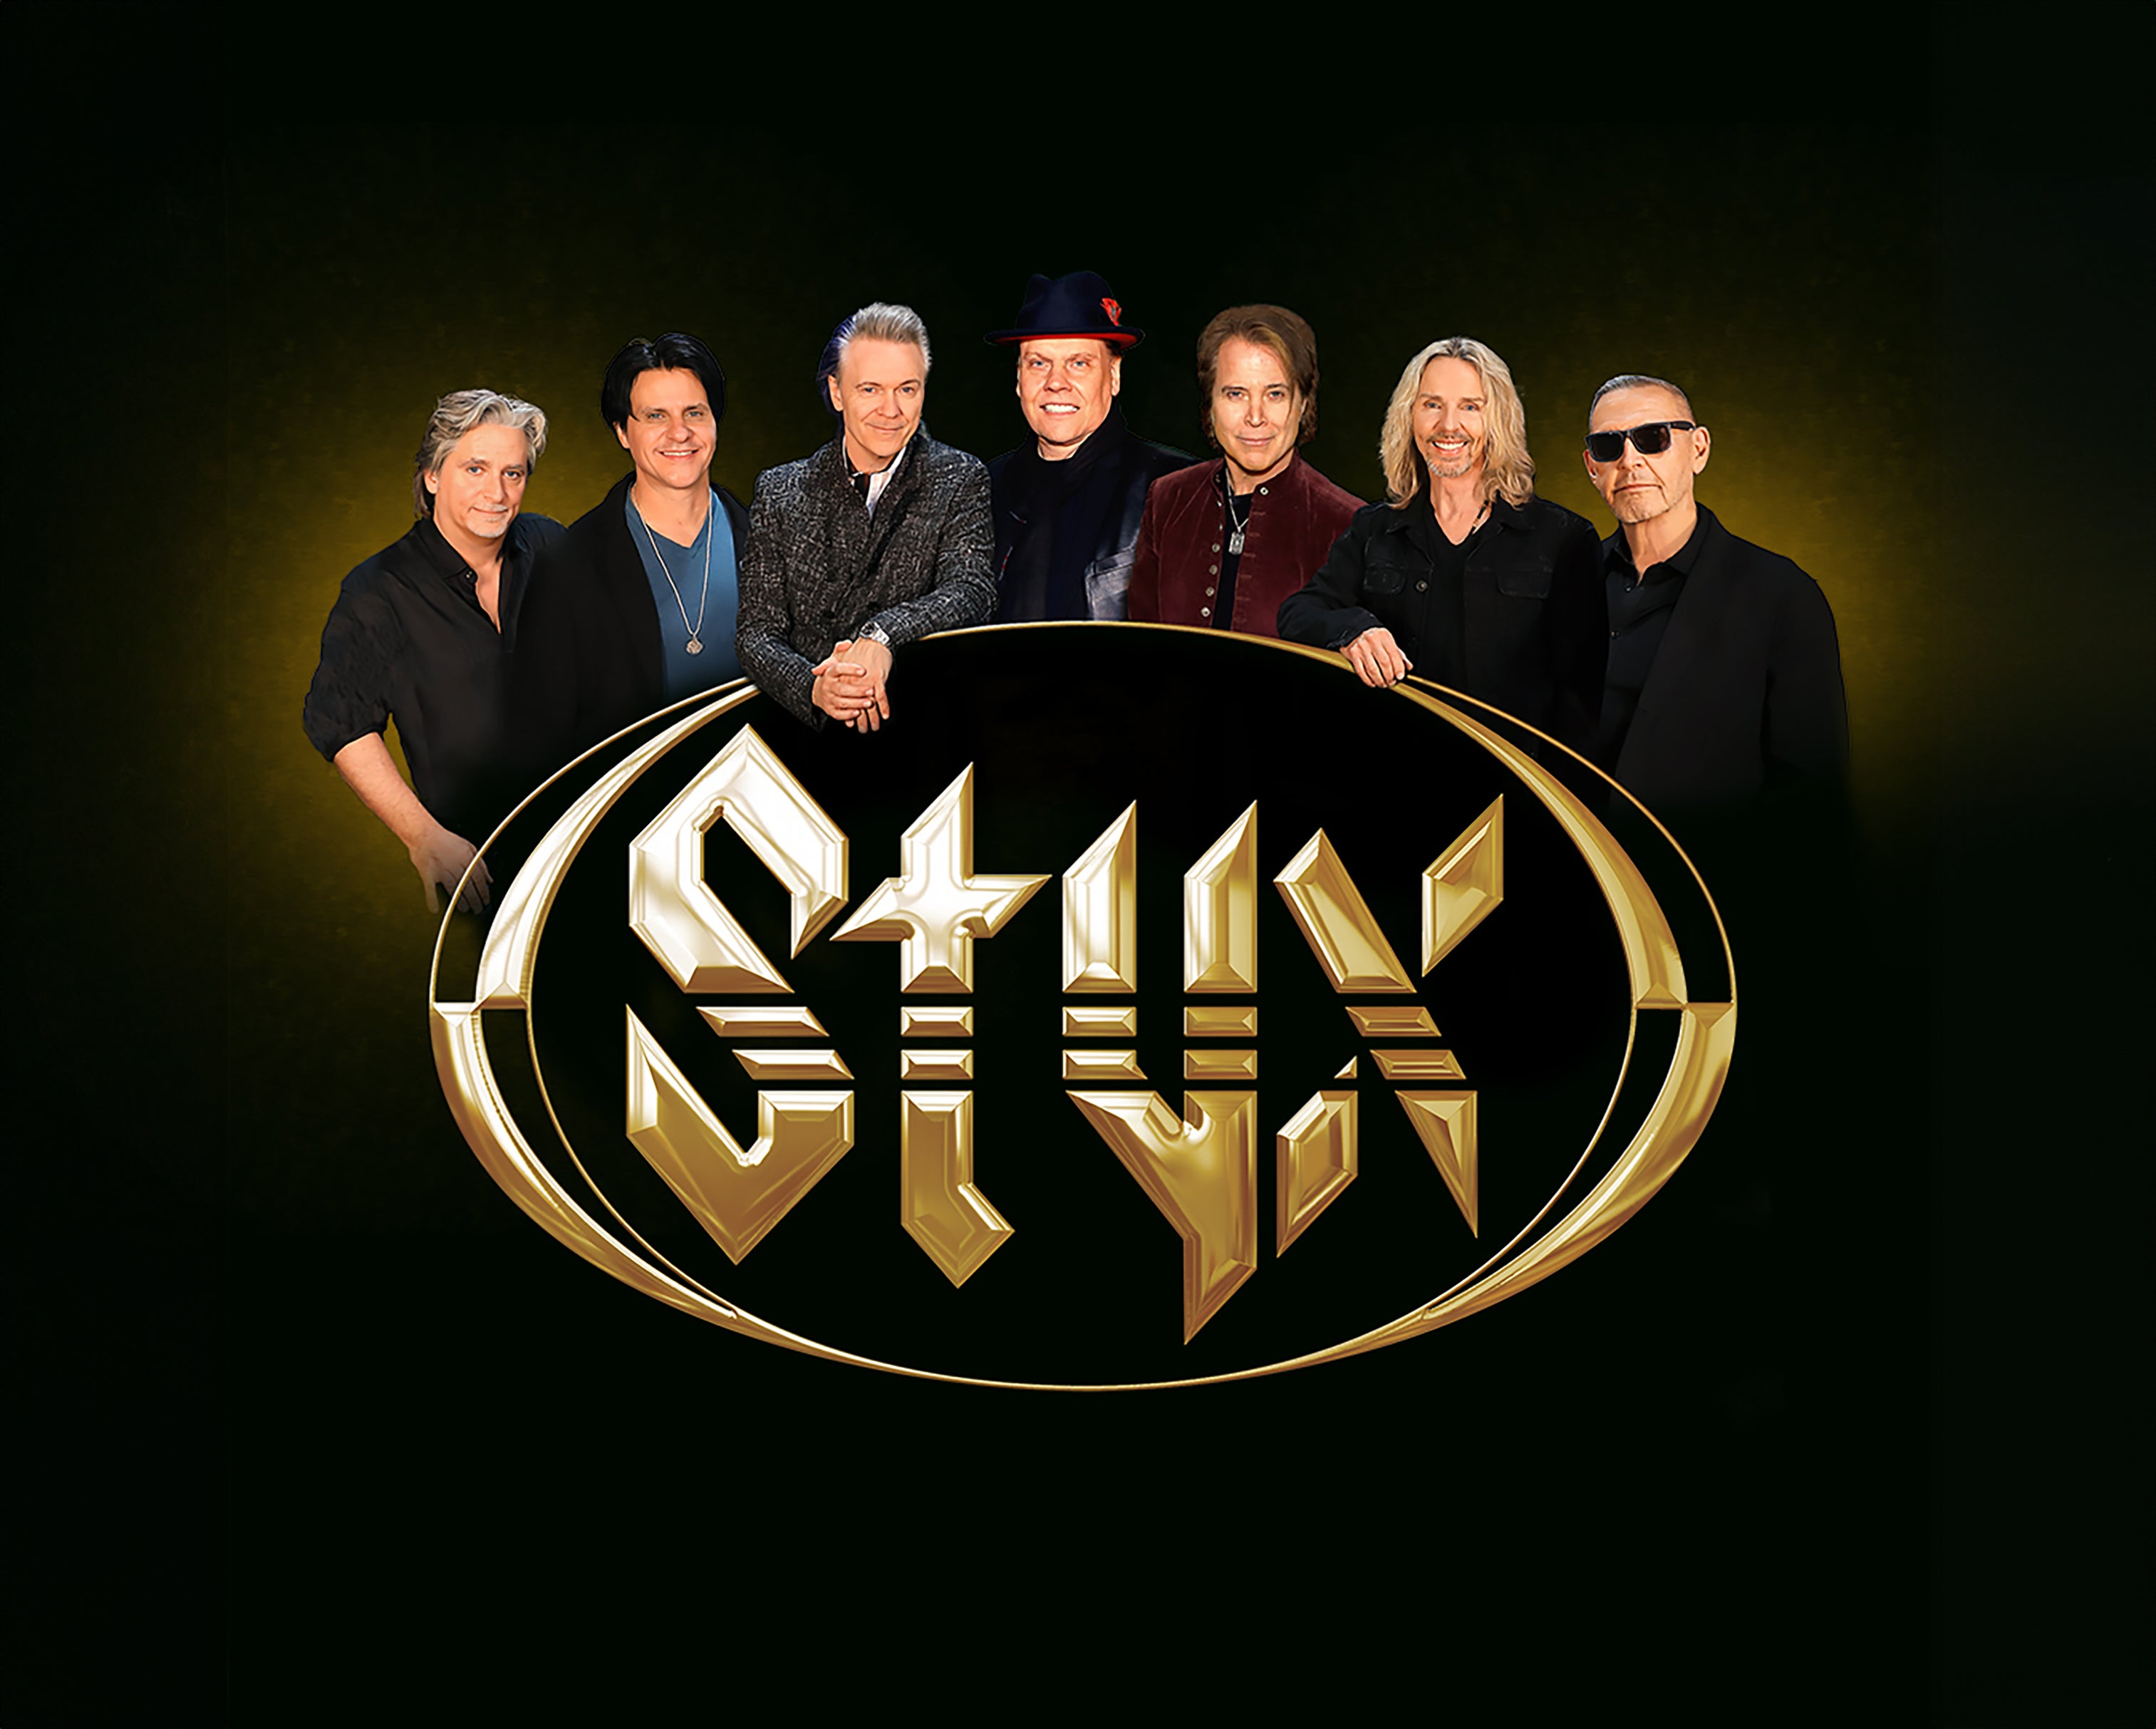 Styx & Foreigner with John Waite: Renegades and Juke Box Heroes Tour in Sioux Falls promo photo for Official Platinum presale offer code